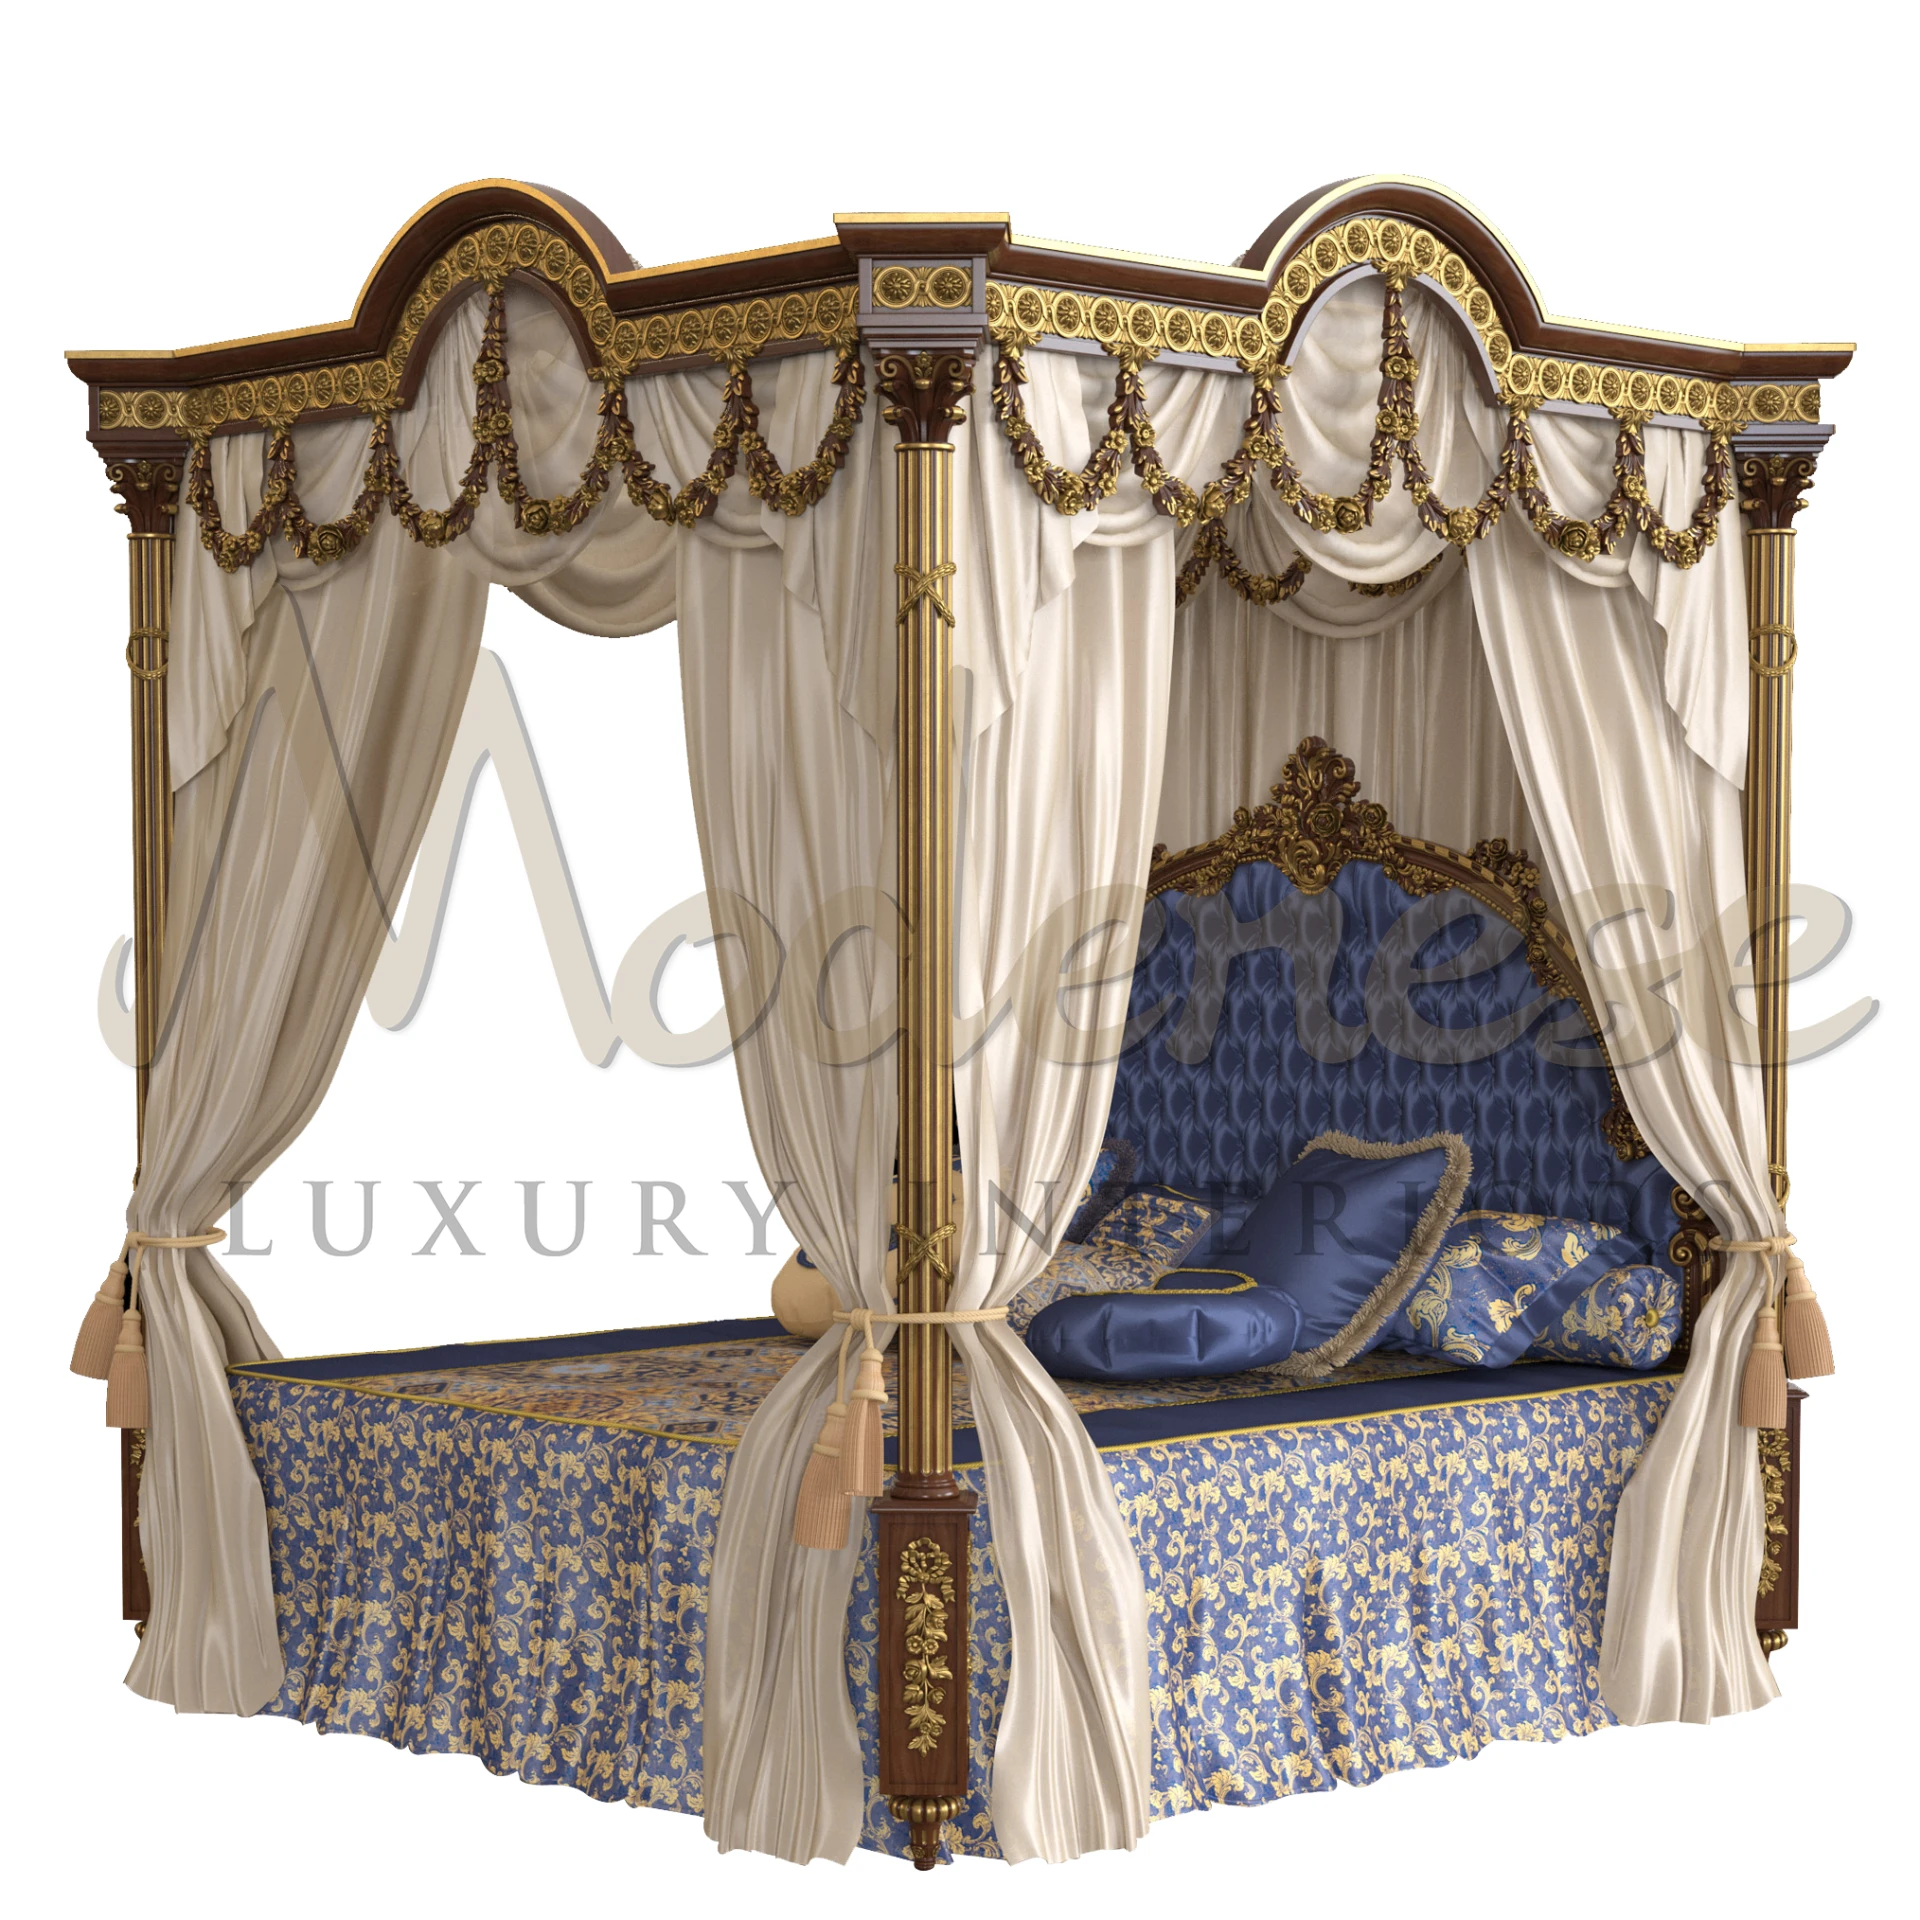 Indulge in regal slumber with our luxury Royal Canopy Bed. Crafted with exquisite detail, it's the epitome of sophistication.